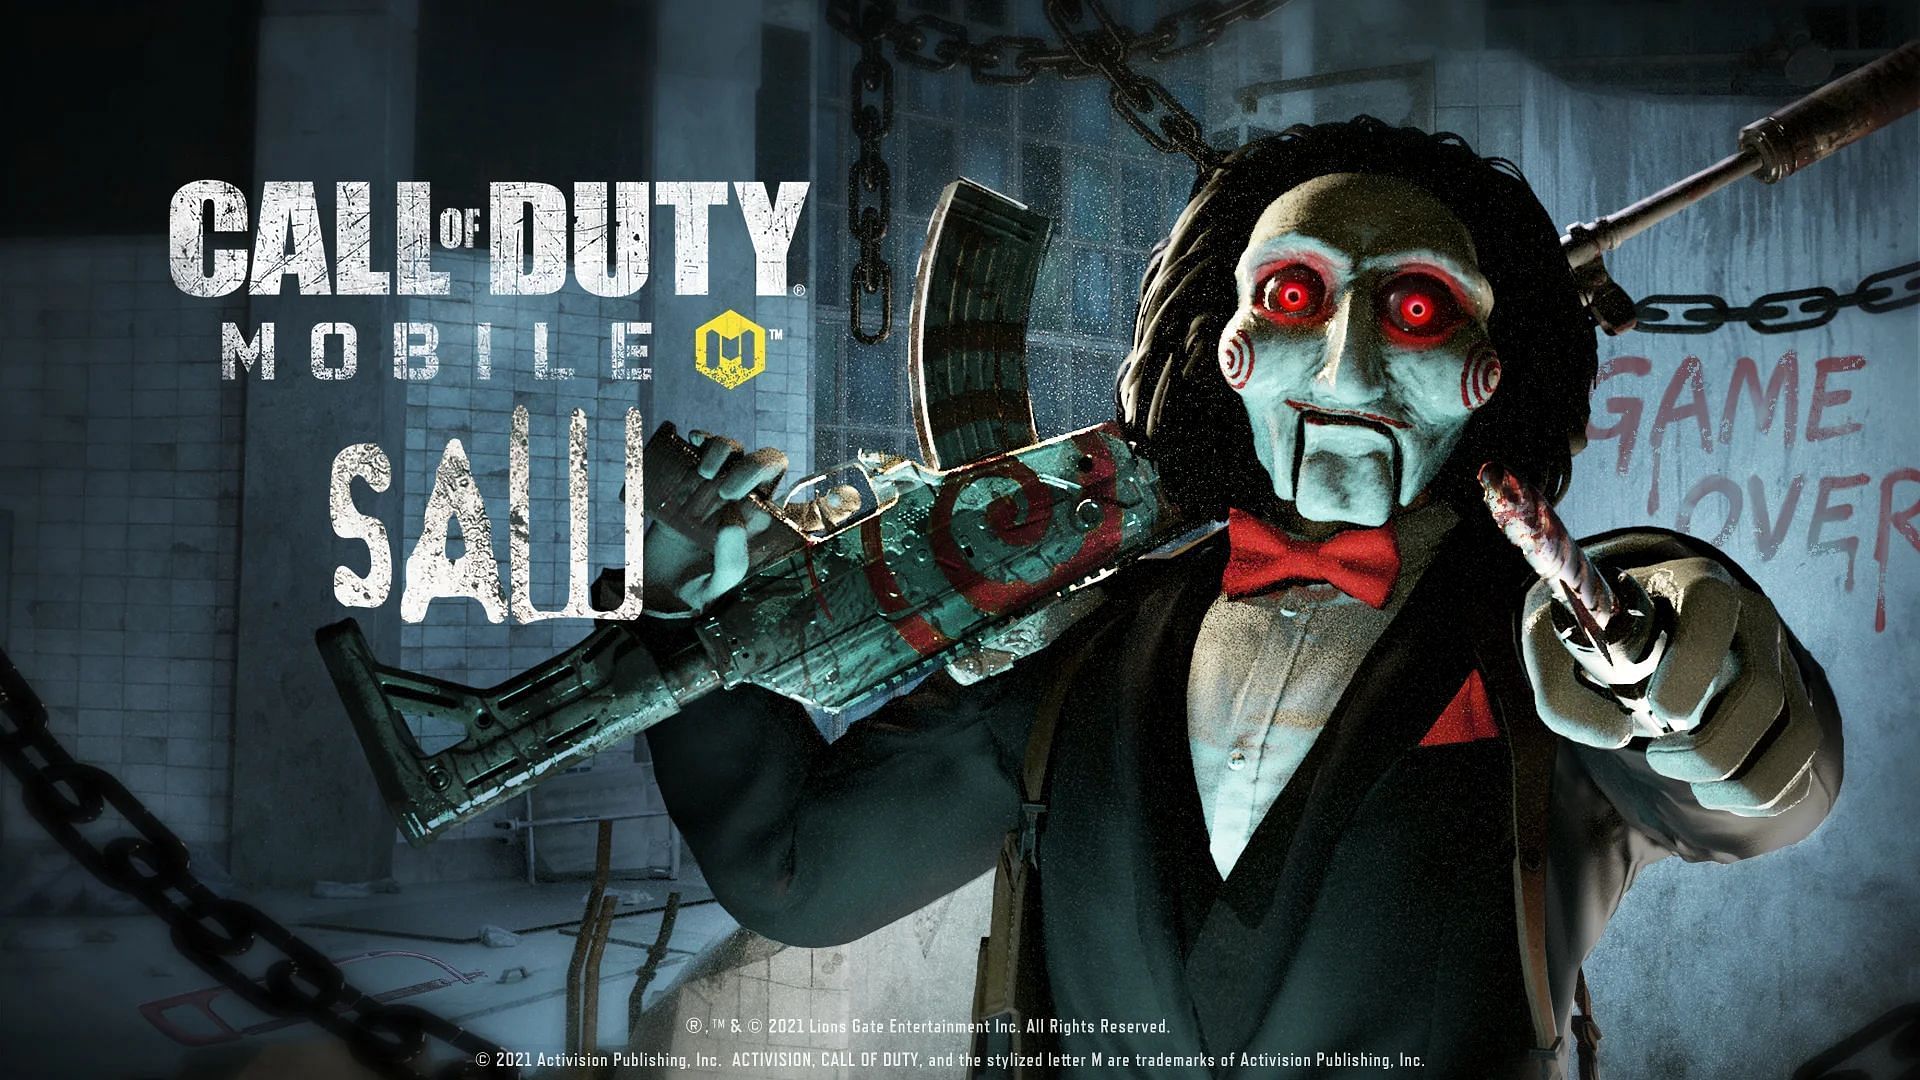 Billy the Puppet from the horror franchise SAW is now a COD Mobile operator thanks to a Halloween collaboration in the game (Image via Activision)